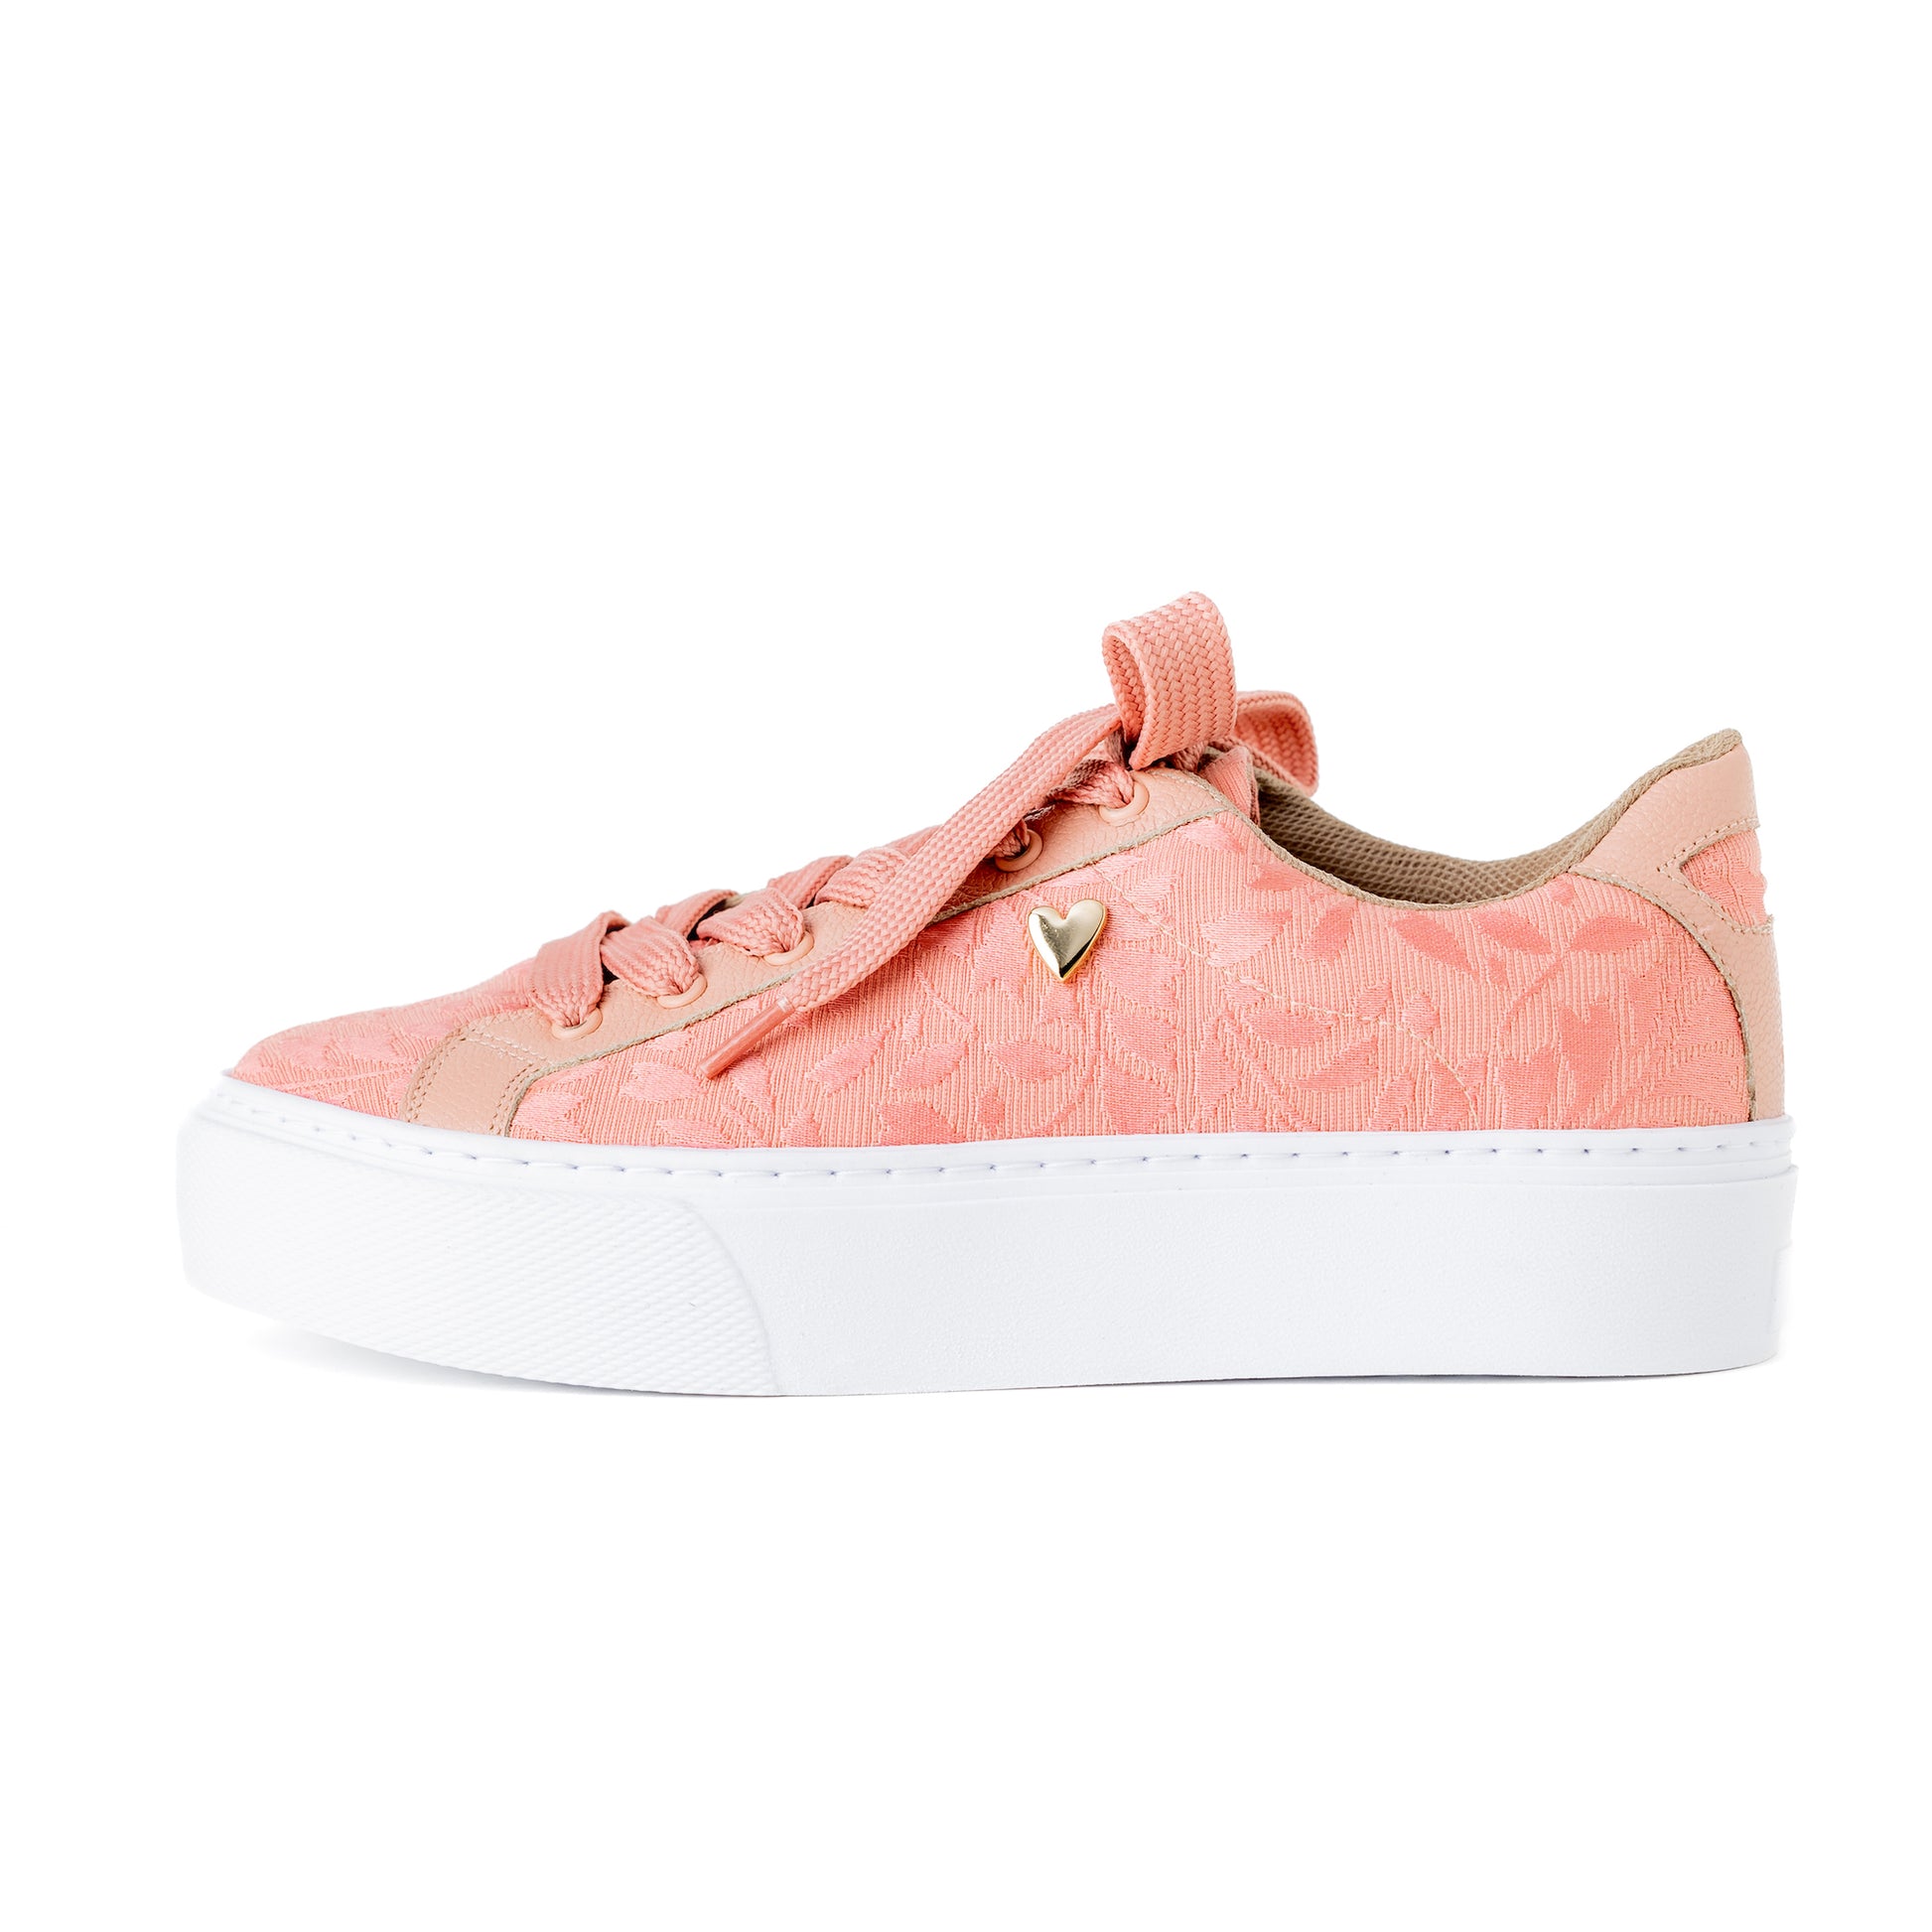 Our classic CARMINA sneakers design but now renewed with a pink floral print, ready to be part of your collection. It was inspired by women who need to feel comfortable in their days. FEATURES Fabric upper material Genuine leather insole lining Rubber platform lining American sizes Flexible rubber outsole Handcrafted 1.5 inch heel height 1 inch platform